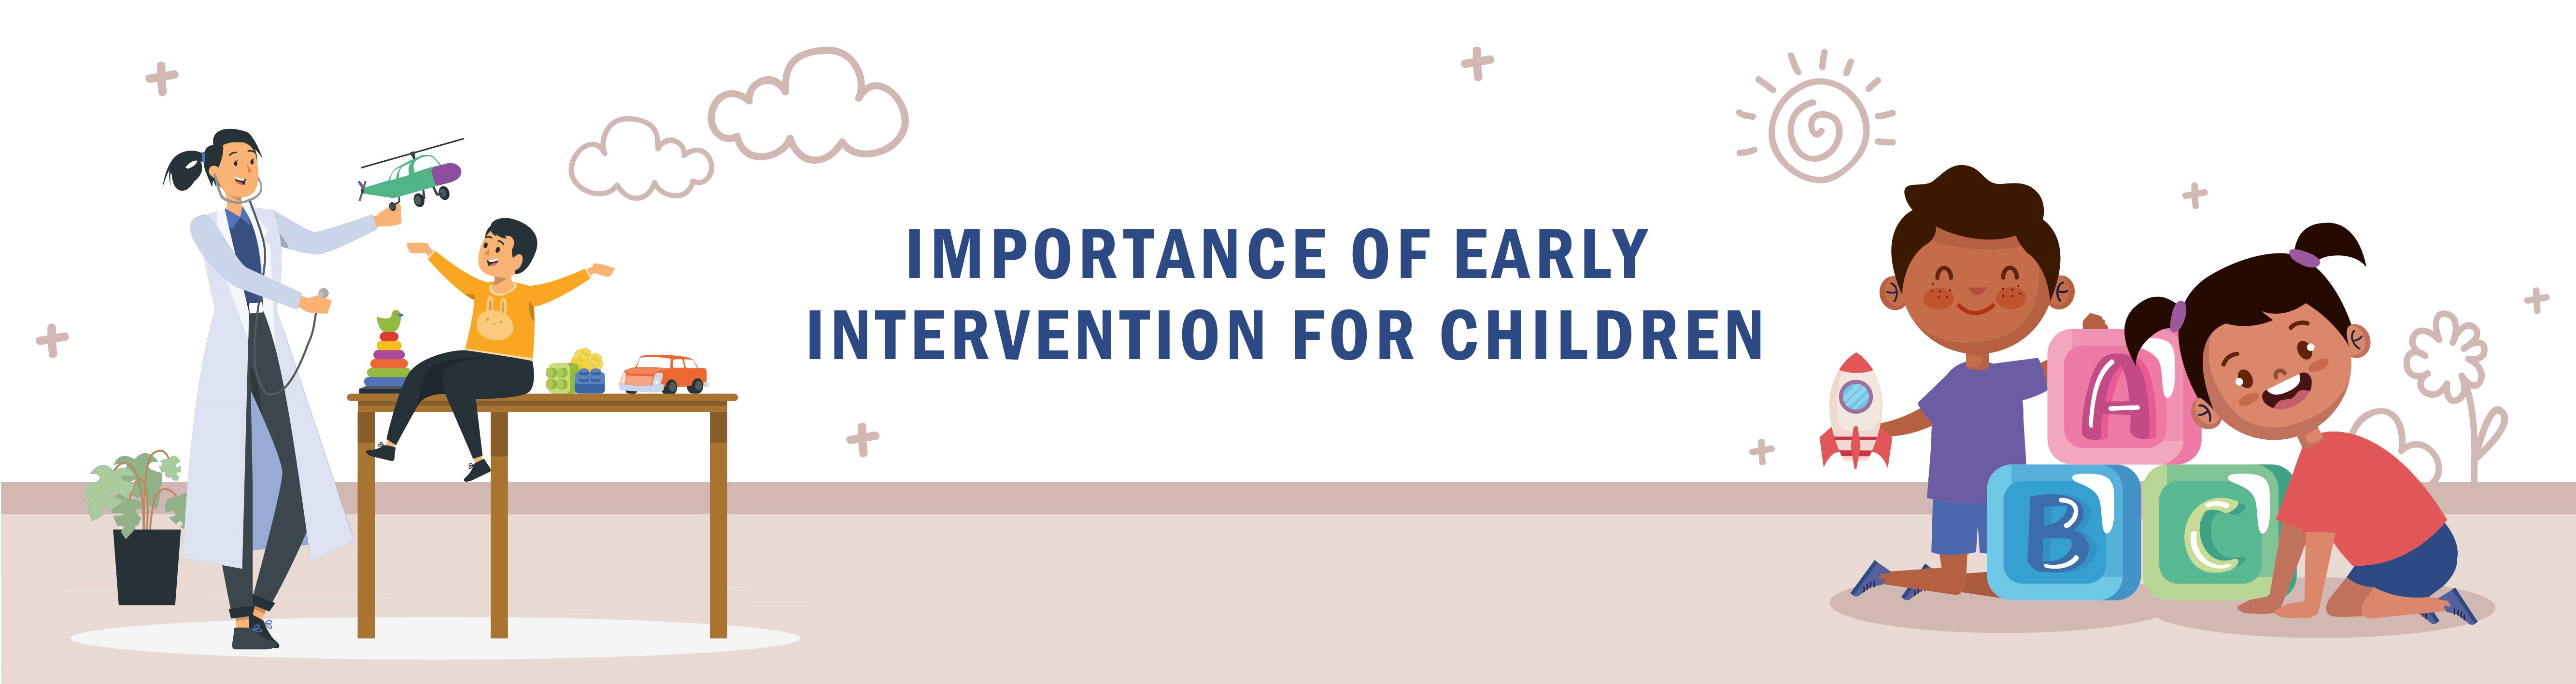 Importance of Early Intervention for Children